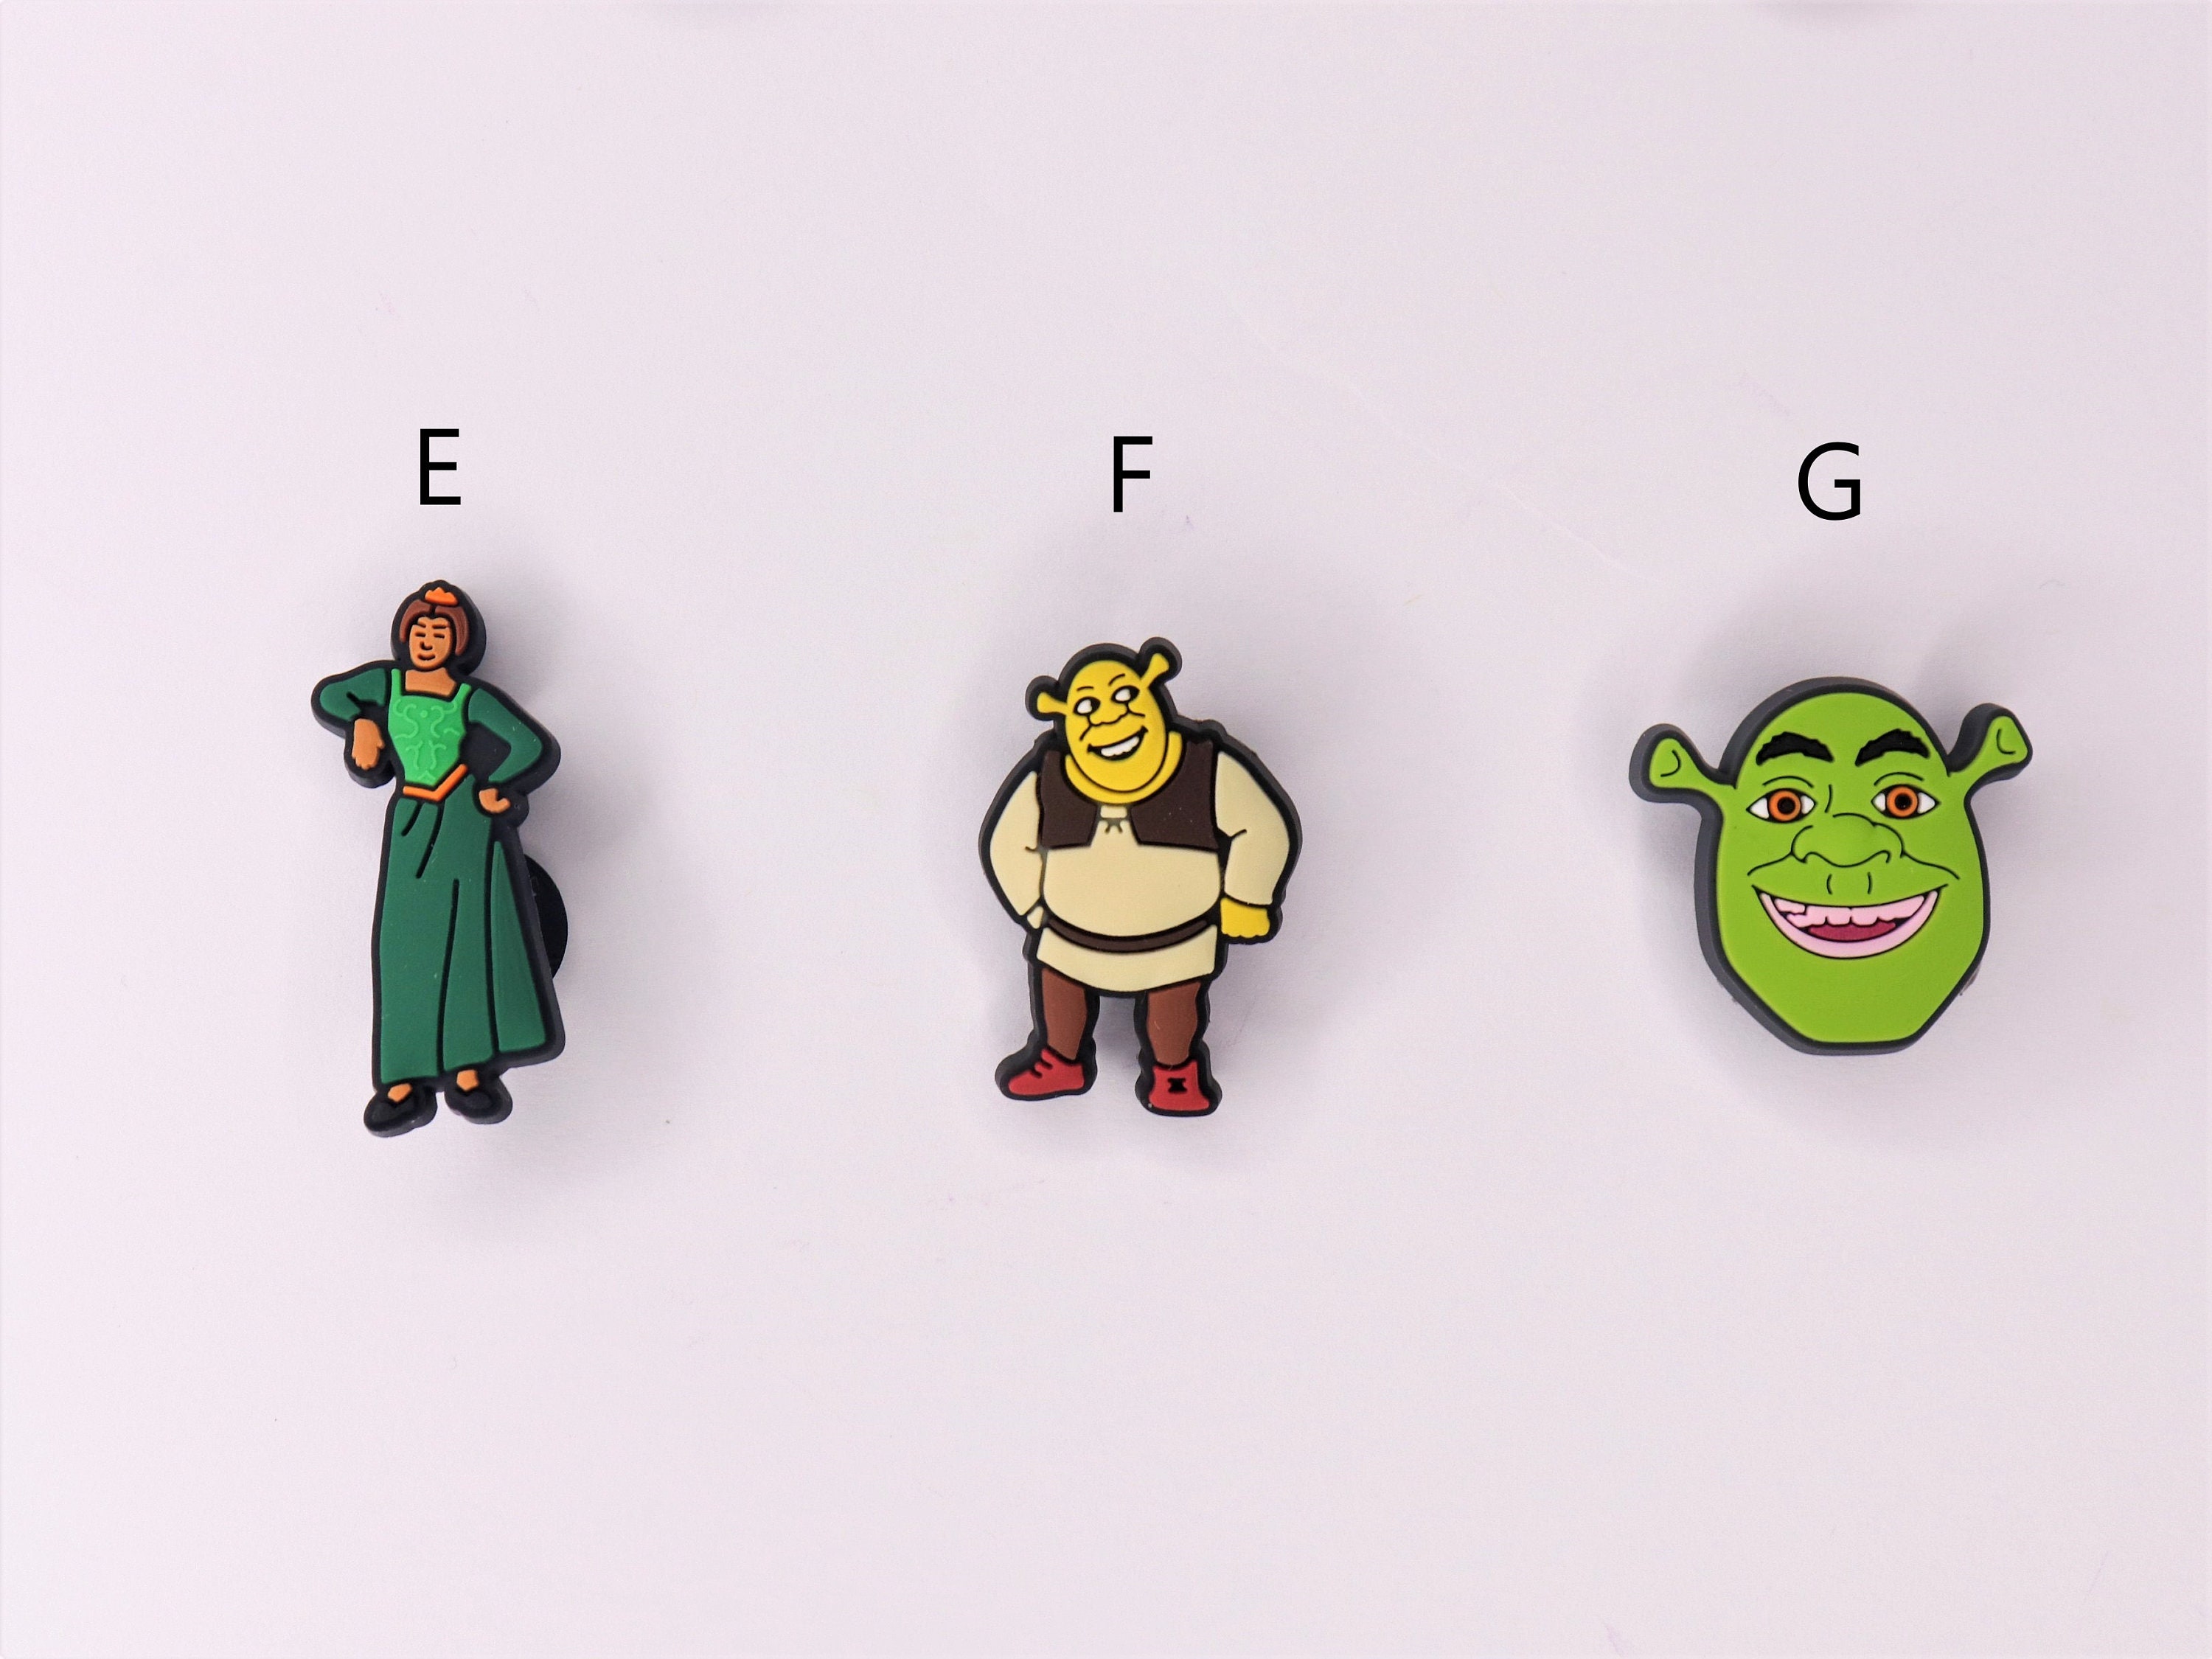 Shrek and Fiona Crocs Charms Ogre Donkey Cartoon 2000's Movie Kids and  Adults Shoe Charm Funny and Unique Mothers Day Gifts 